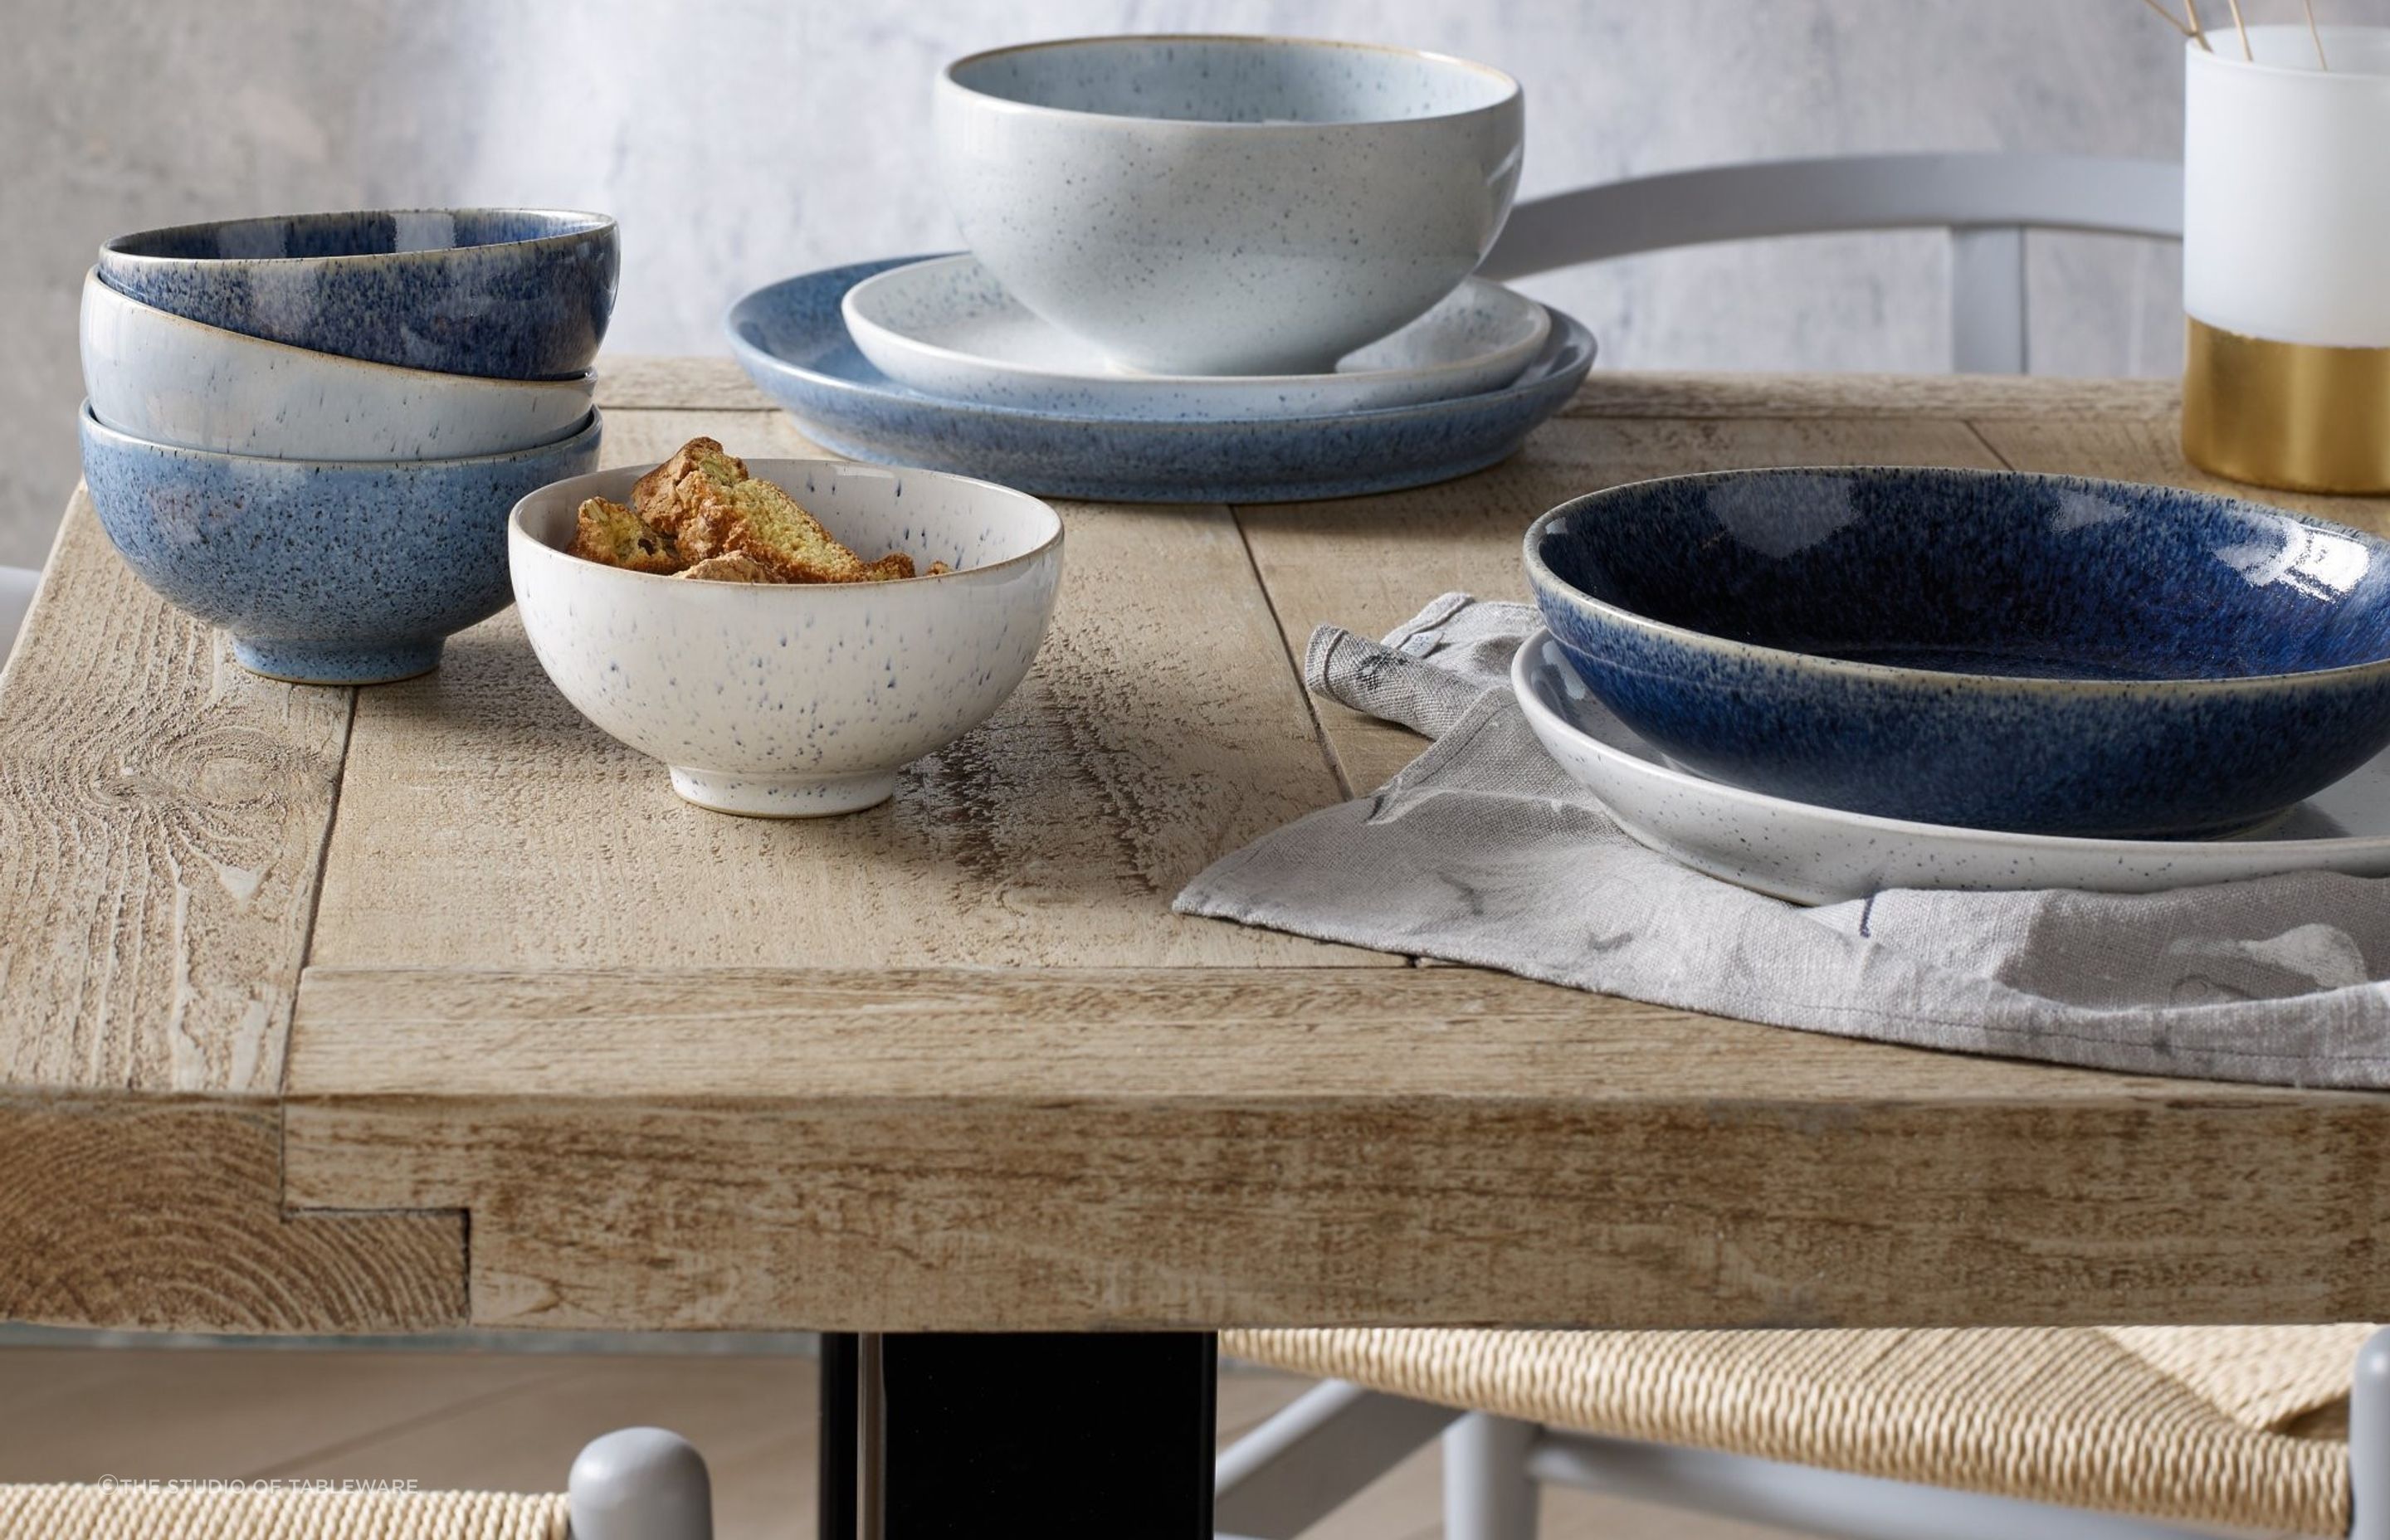 The stunning Studio Blue Dinnerware set shows just how much high-quality table settings can enhance a dining room.